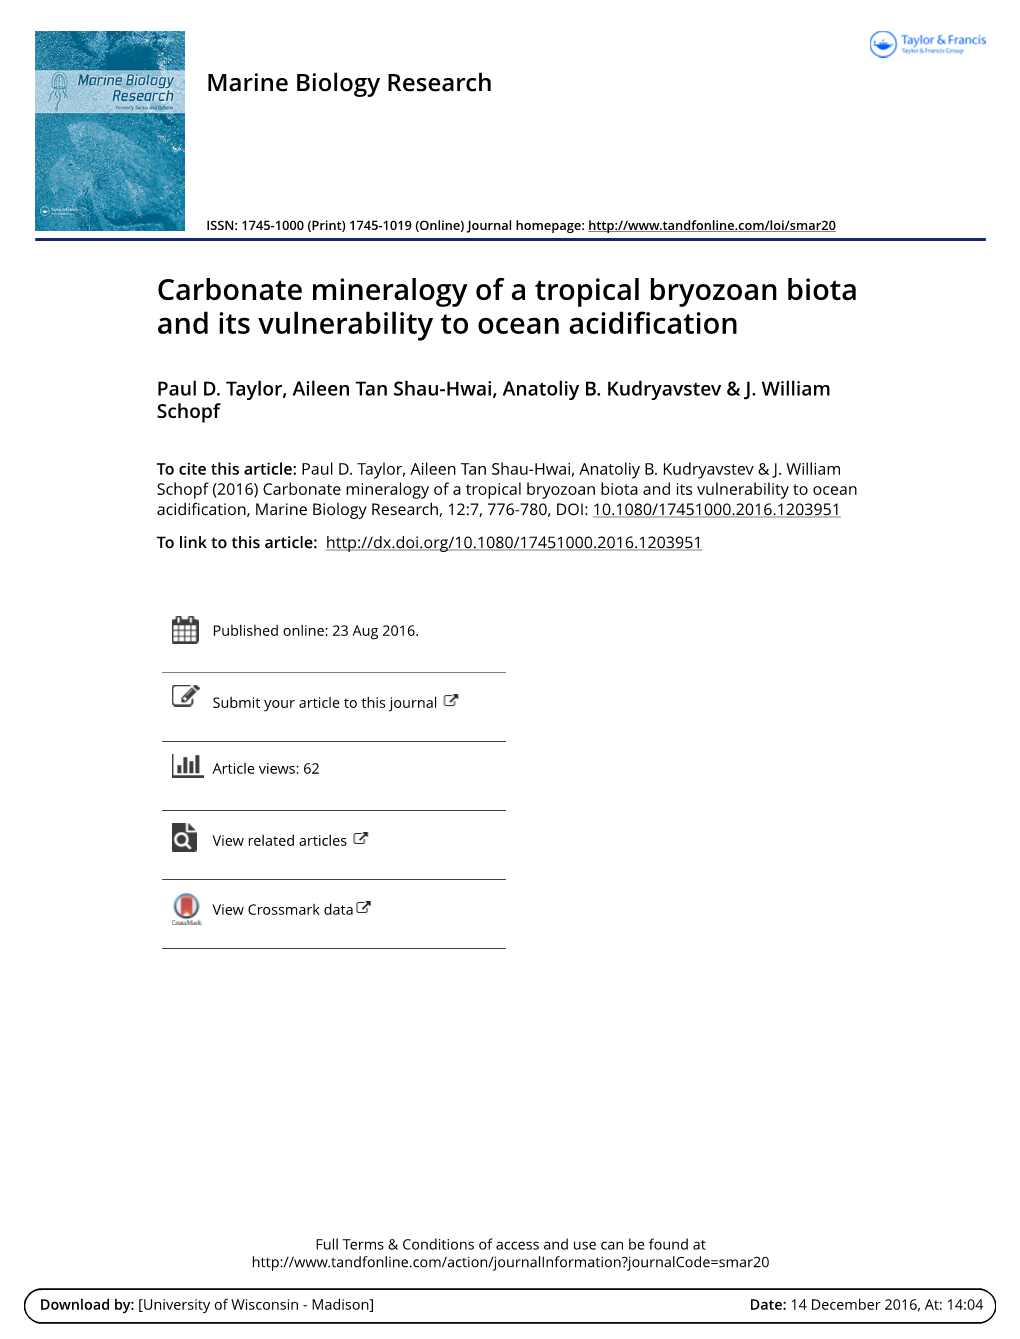 Carbonate Mineralogy of a Tropical Bryozoan Biota and Its Vulnerability to Ocean Acidification